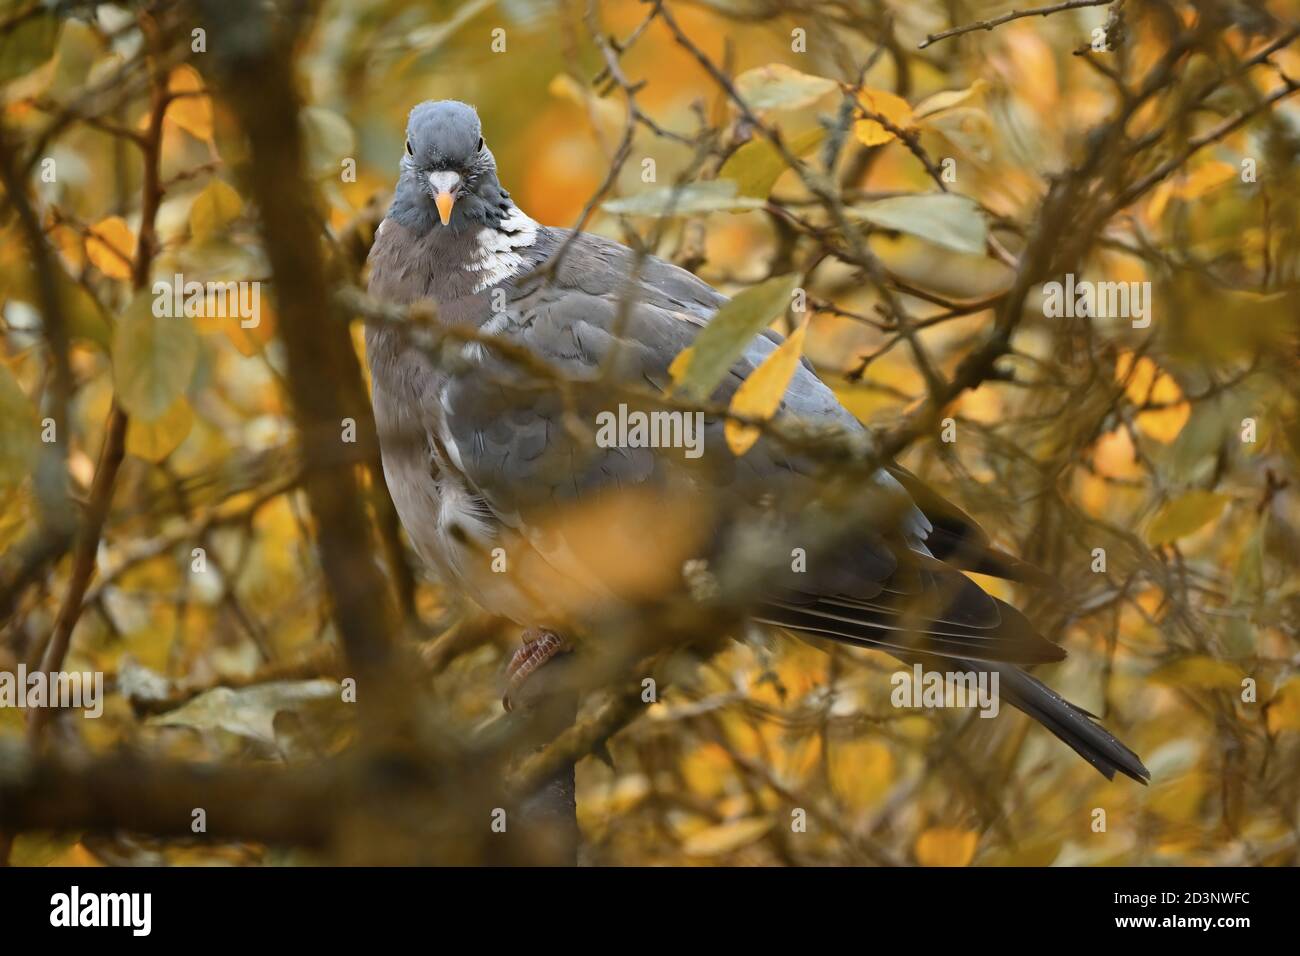 A wood pigeon on a branch, frontal view. Wild dove bird in colorful autumn foliage. Stock Photo